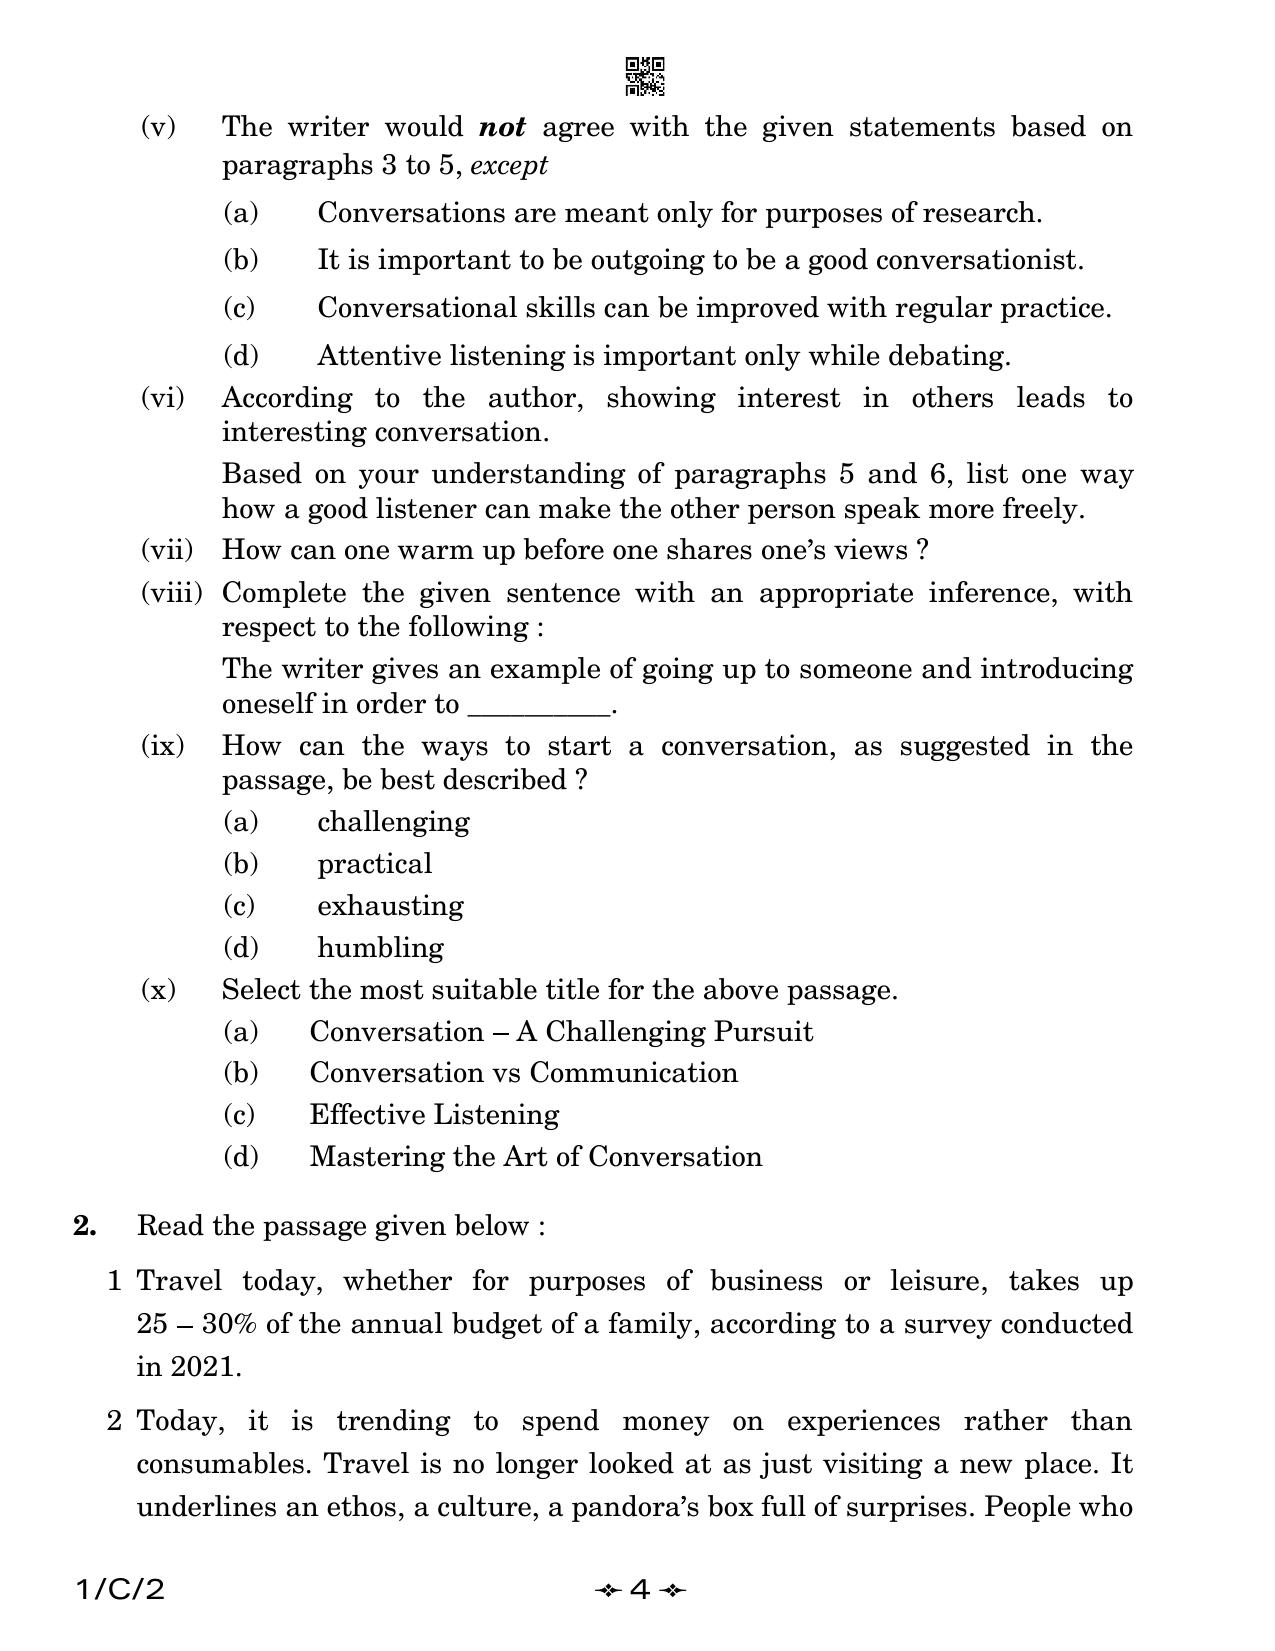 CBSE Class 12 1-2 English Core 2023 (Compartment) Question Paper - Page 4